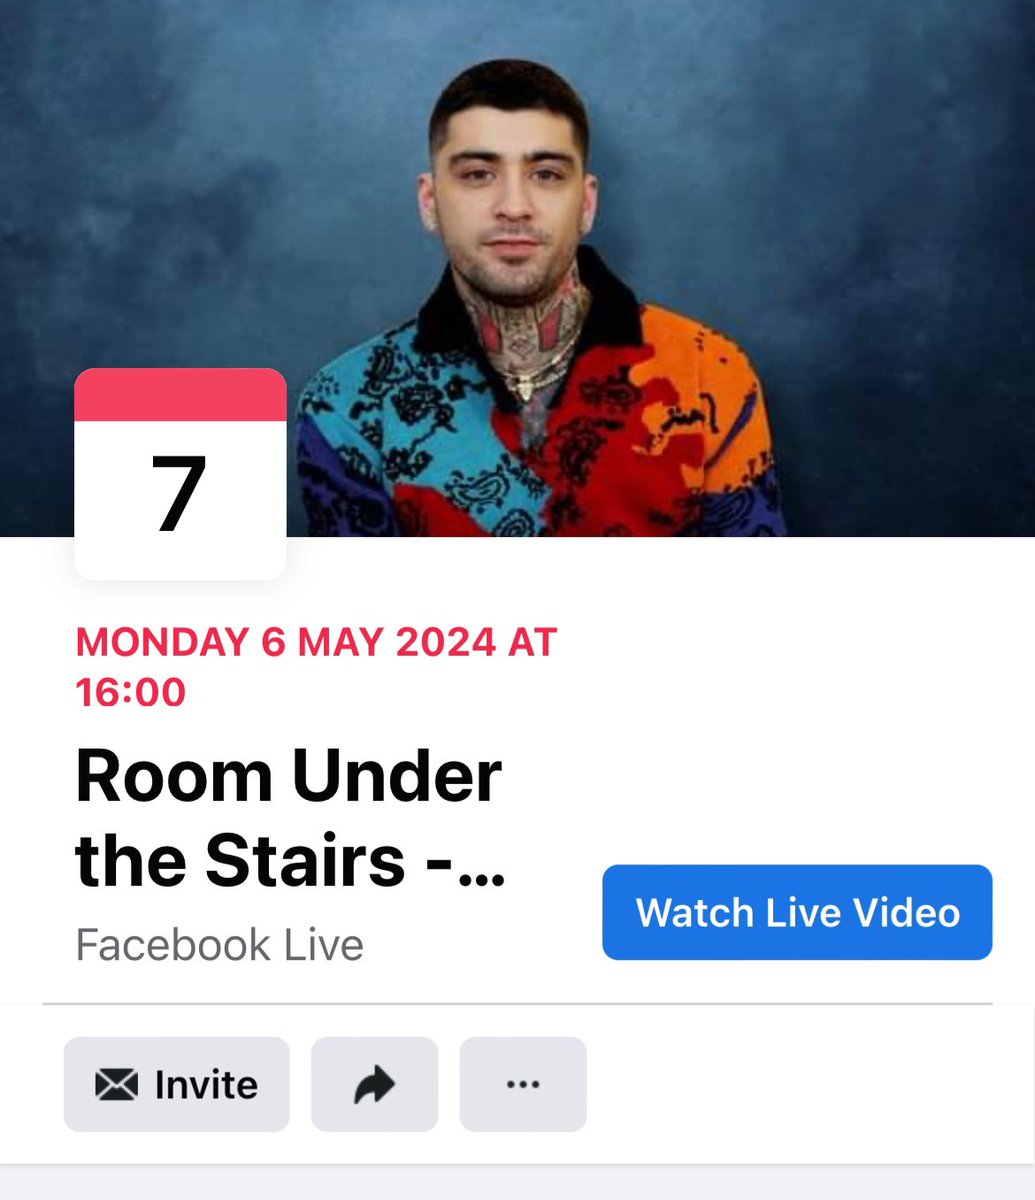 Zayn Malik will be live on Facebook on May 6th!